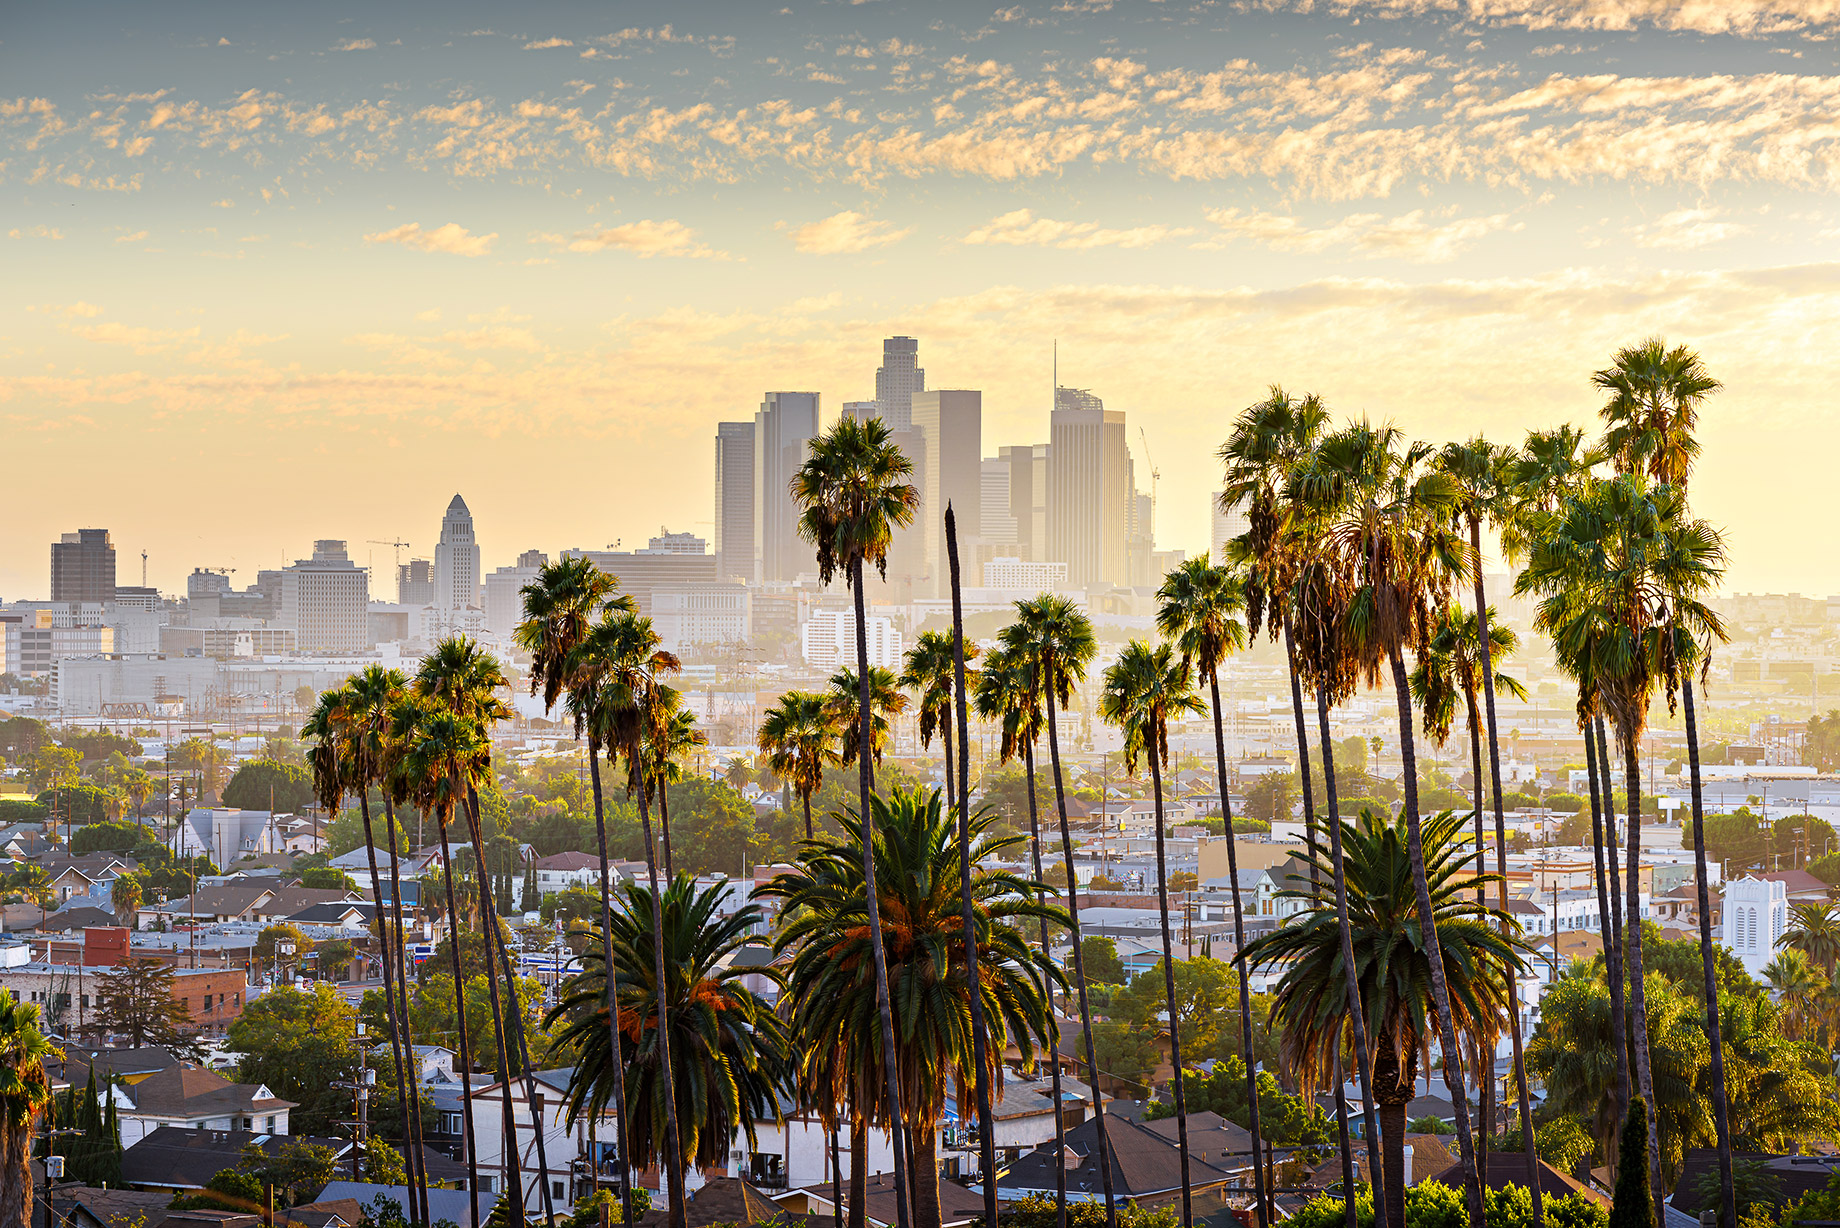 Cityscape with Palm Trees at Sunset - Los Angeles, California, USA